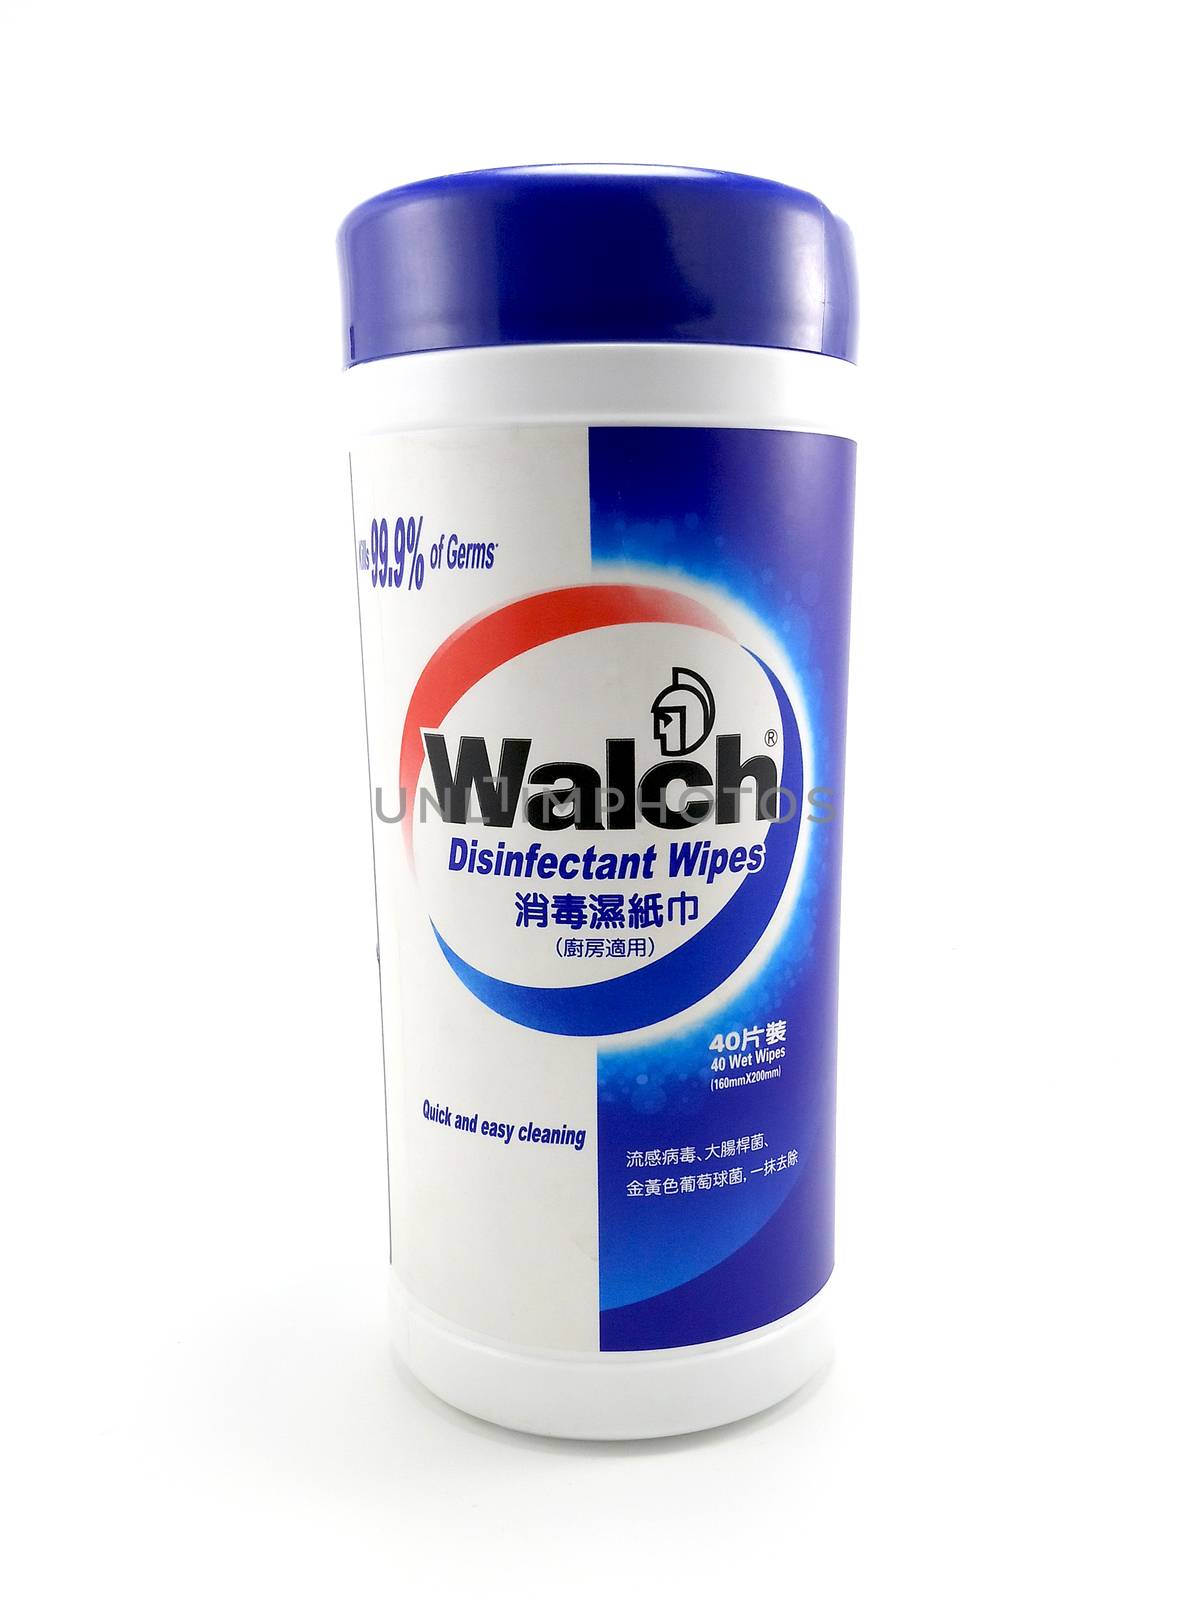 MANILA, PH - JUNE 23 - Walch disinfectant wipes wet tissue on June 23, 2020 in Manila, Philippines.